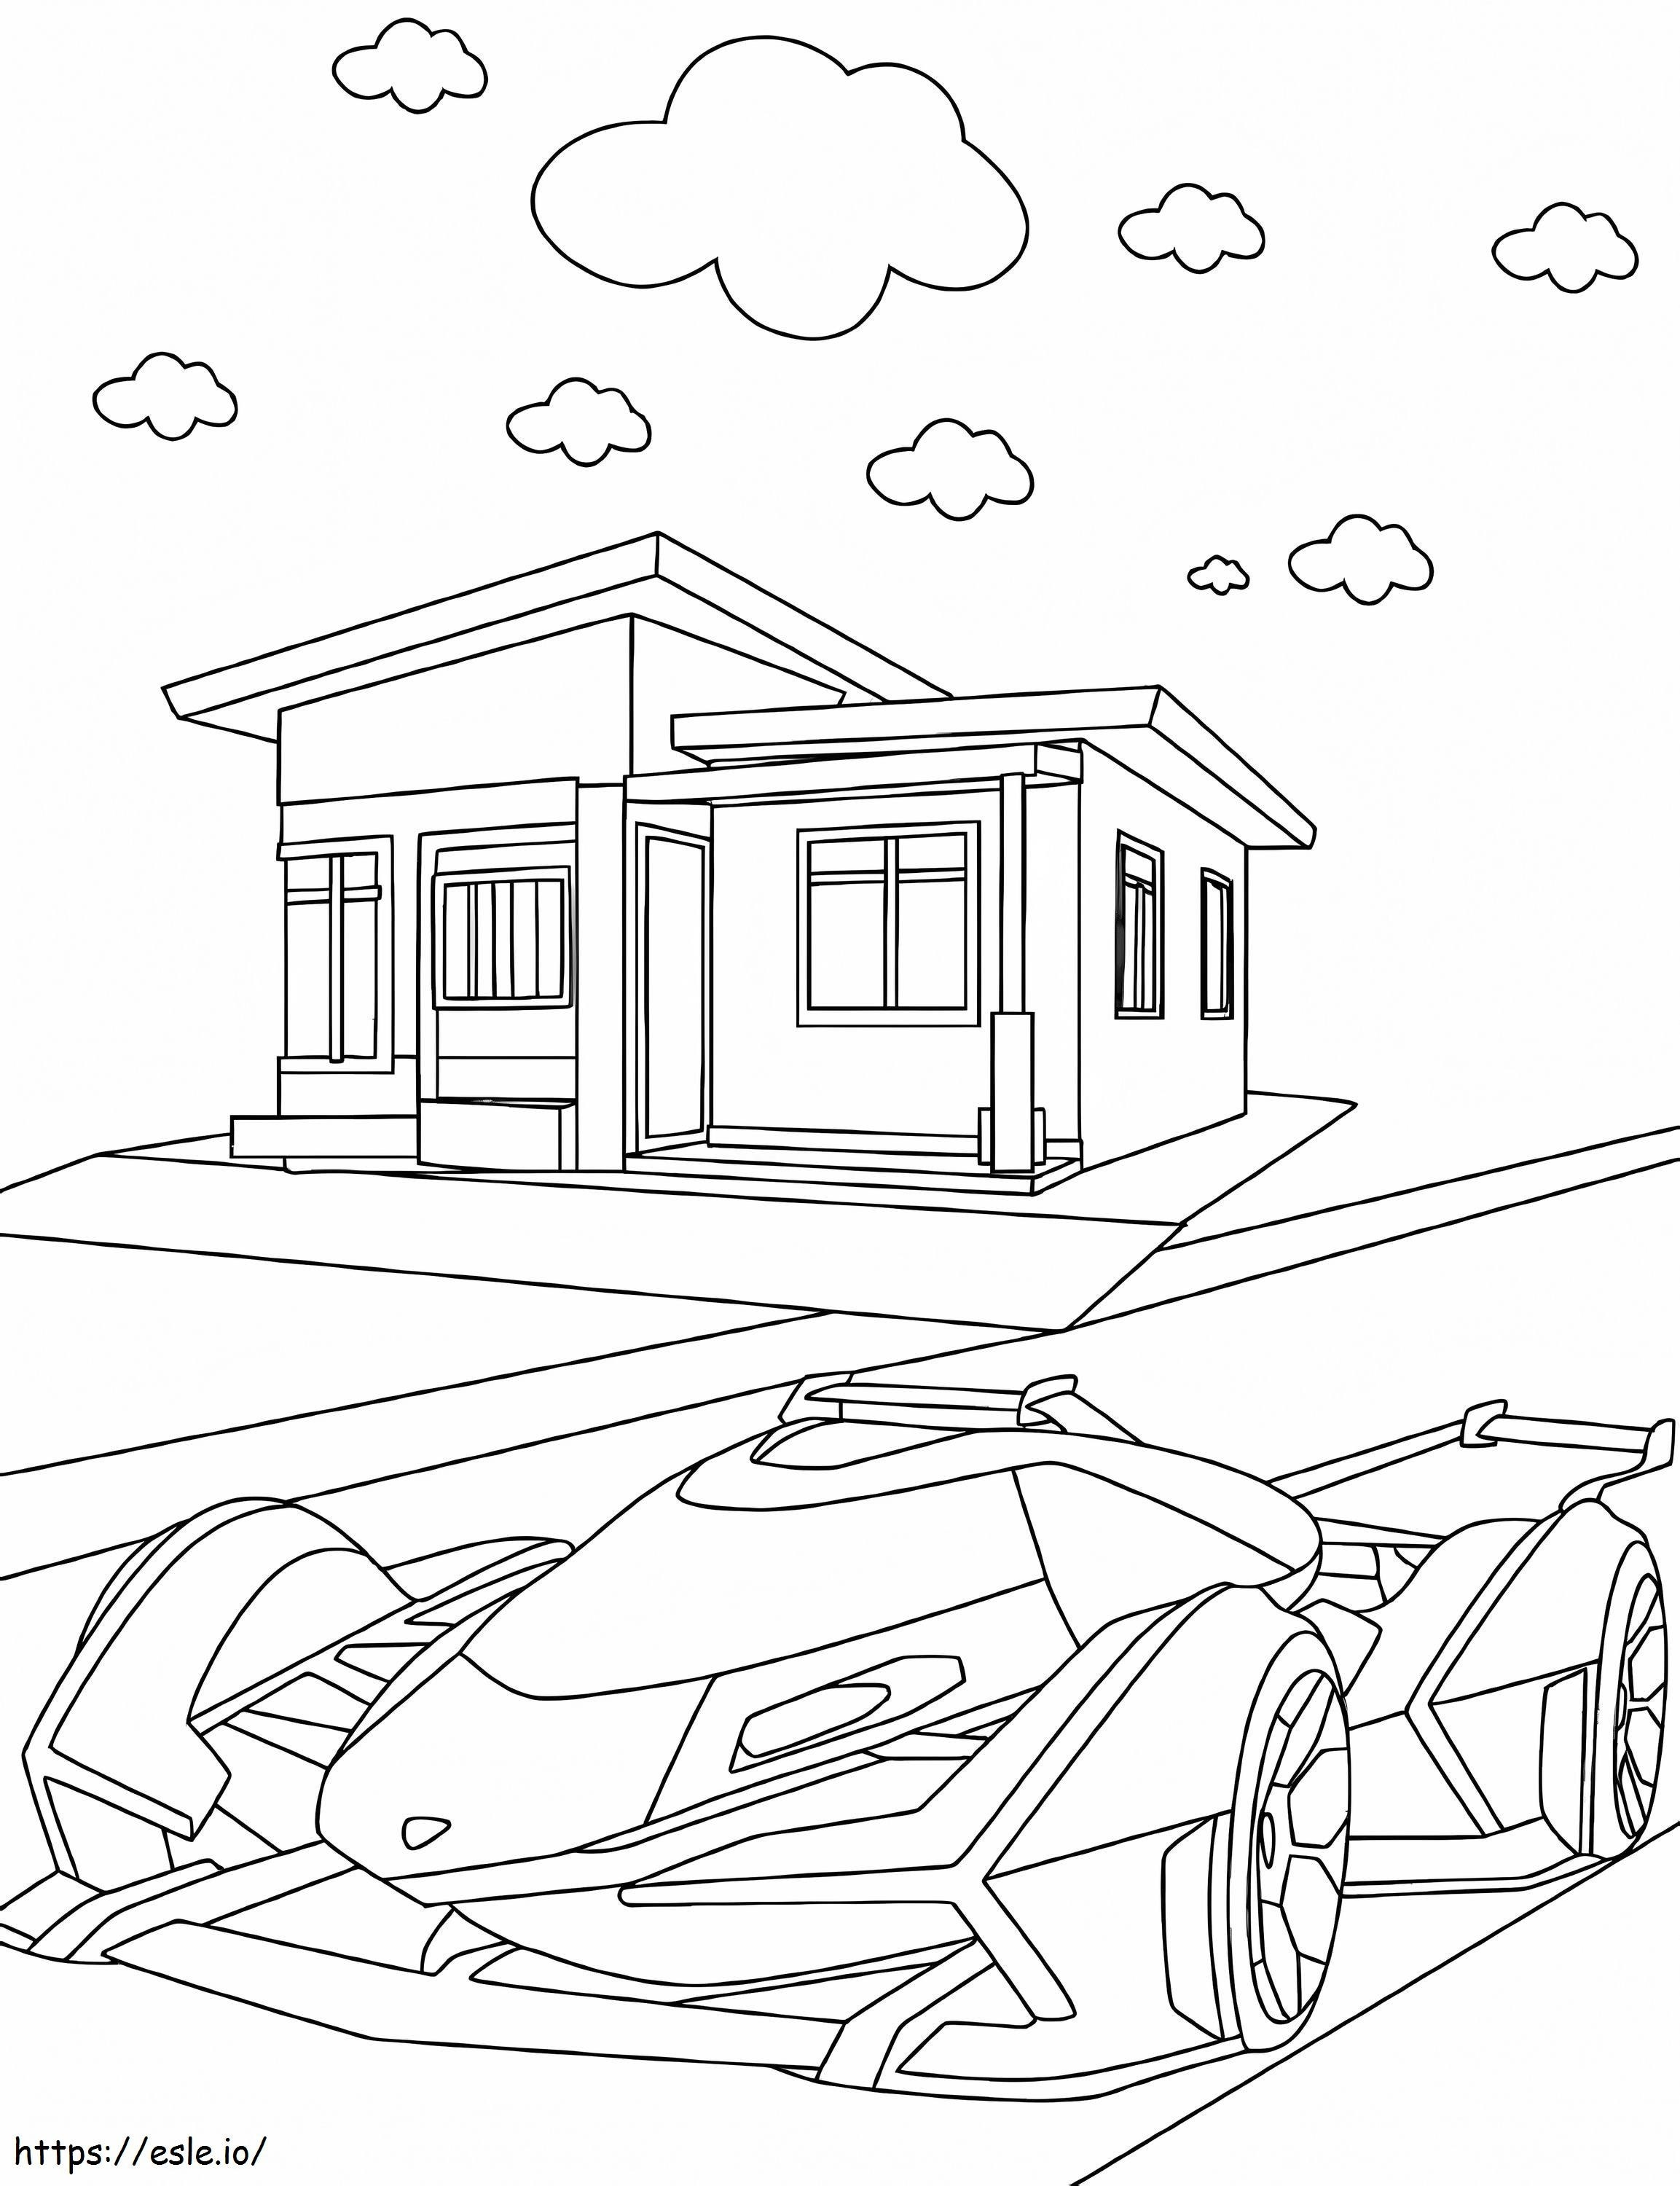 Lamborghini And House coloring page